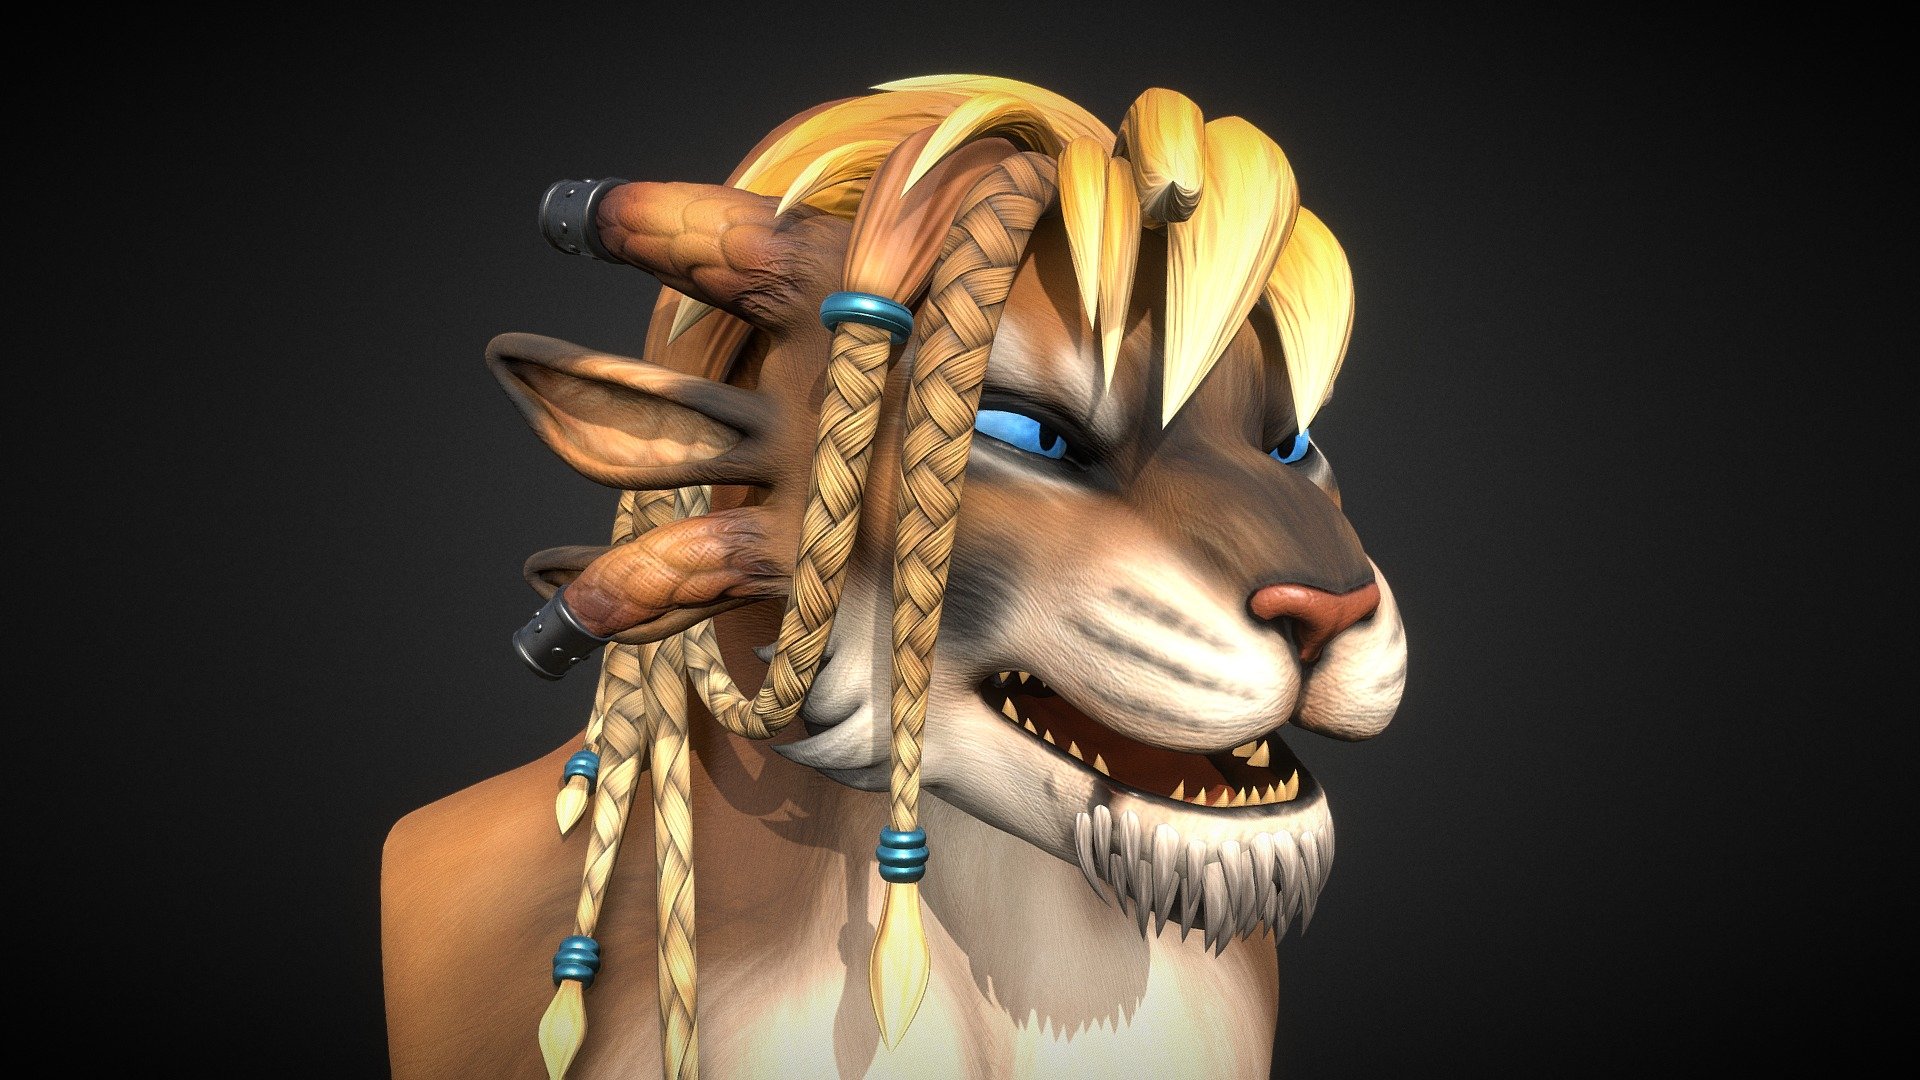 Sculpted bust and birthday gift for the wonderful Coffee Kitten of his charr lady, Tamka Ironpaw!

Sculpted in Blender 2.83, textured in Substance Painter 2020.1.2 - Tamka Ironpaw - Sculpted Bust - 3D model by Kianga 3d model